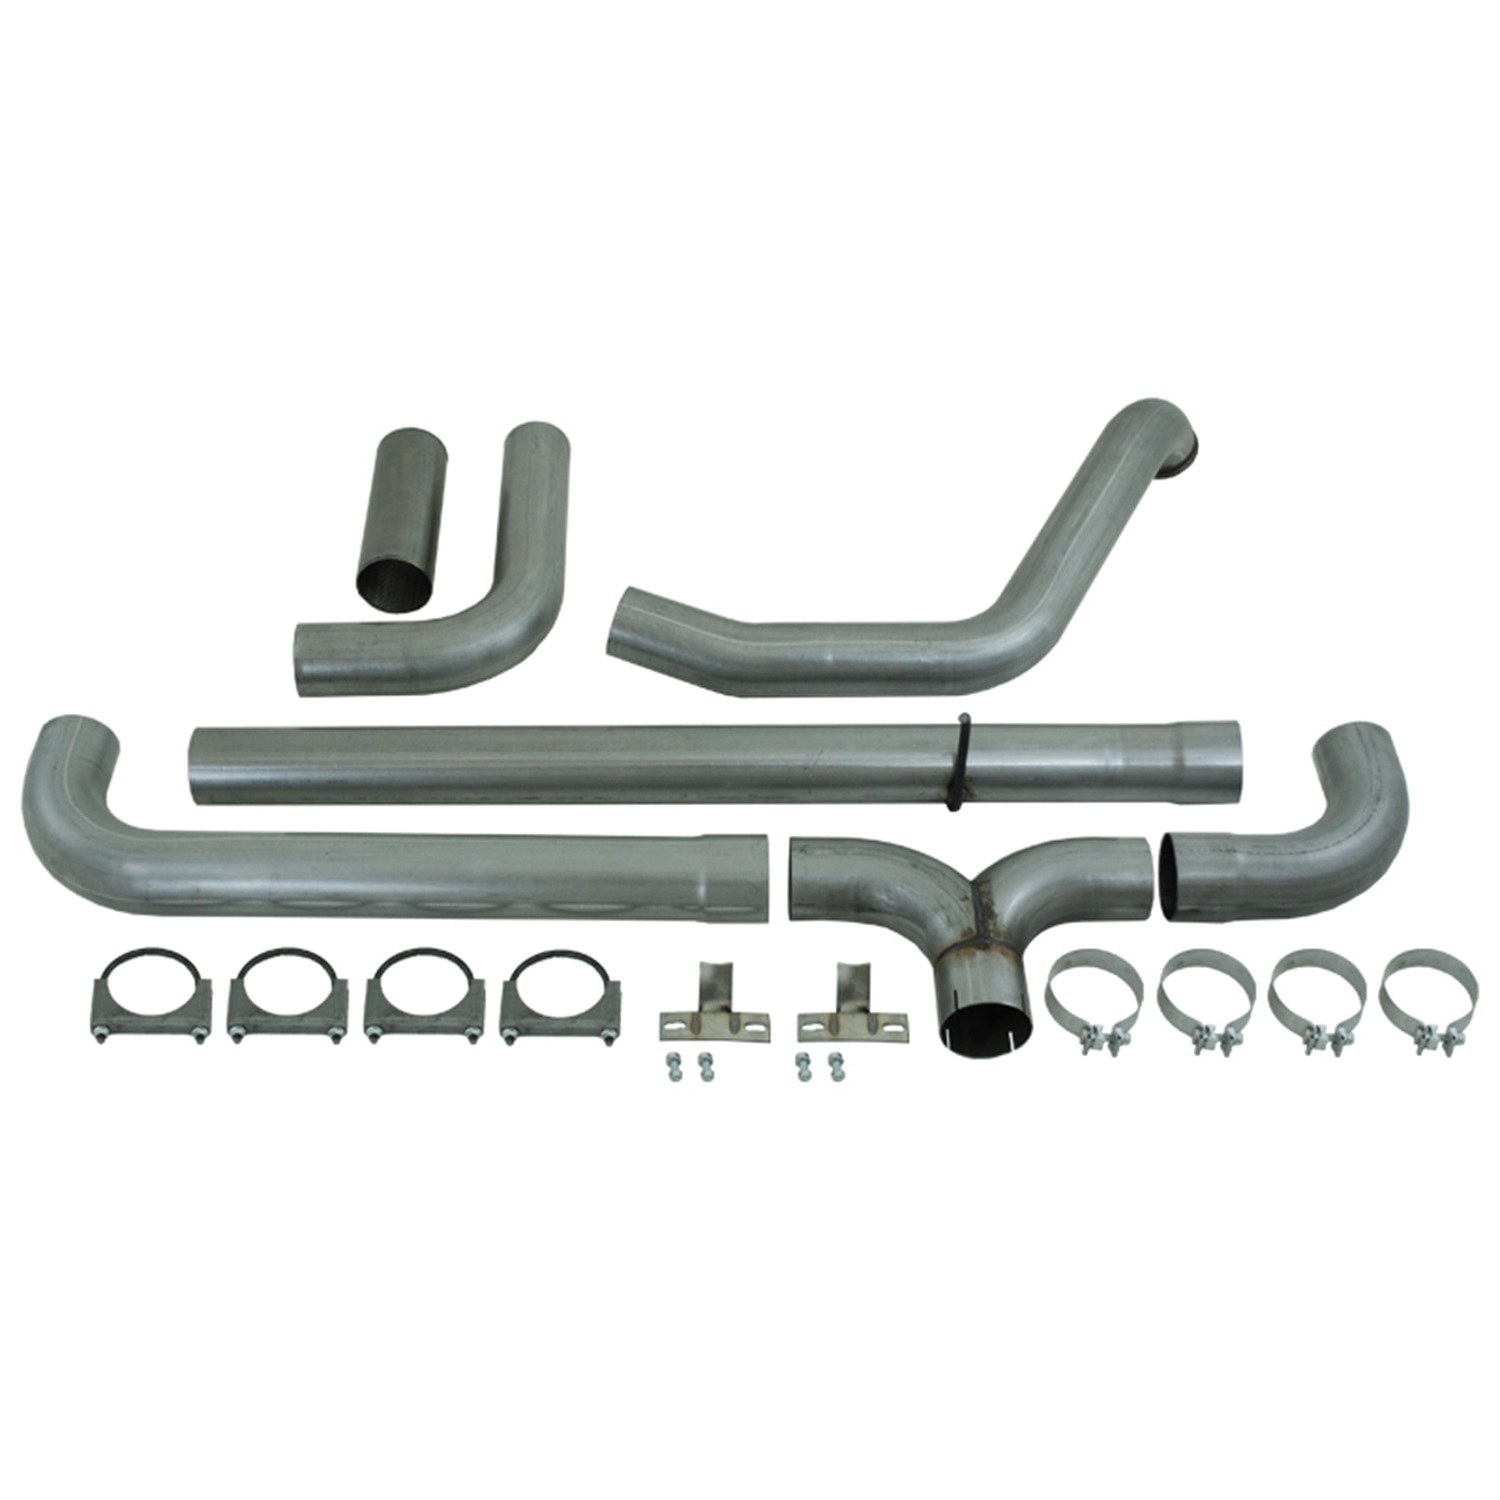 MBRP Exhaust MBRP Exhaust S8200AL Smokers; Installer Series Turbo Back Stack Exhaust System